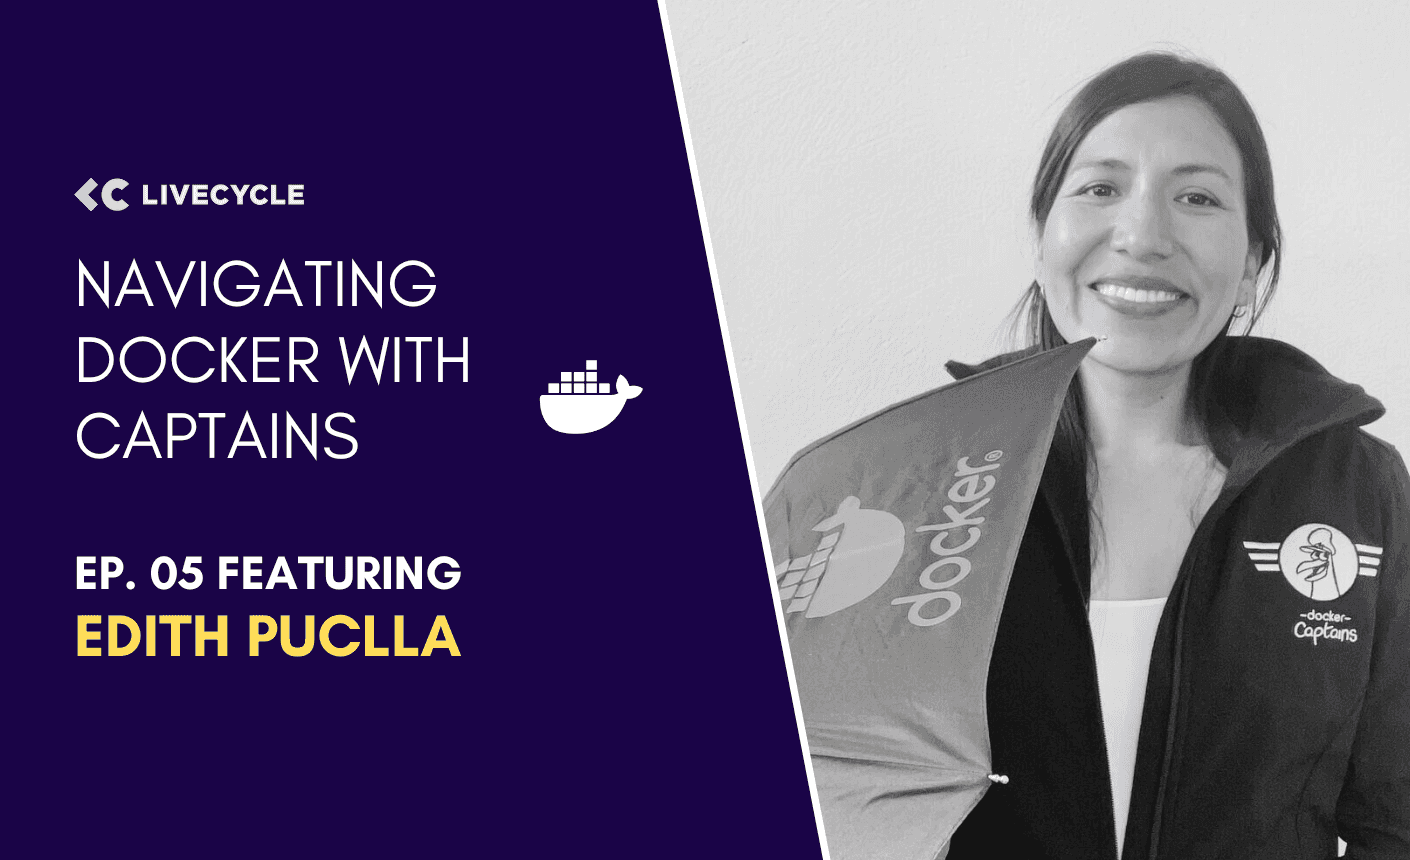 Navigating Docker With Captains Ep. 05 with Edith Puclla